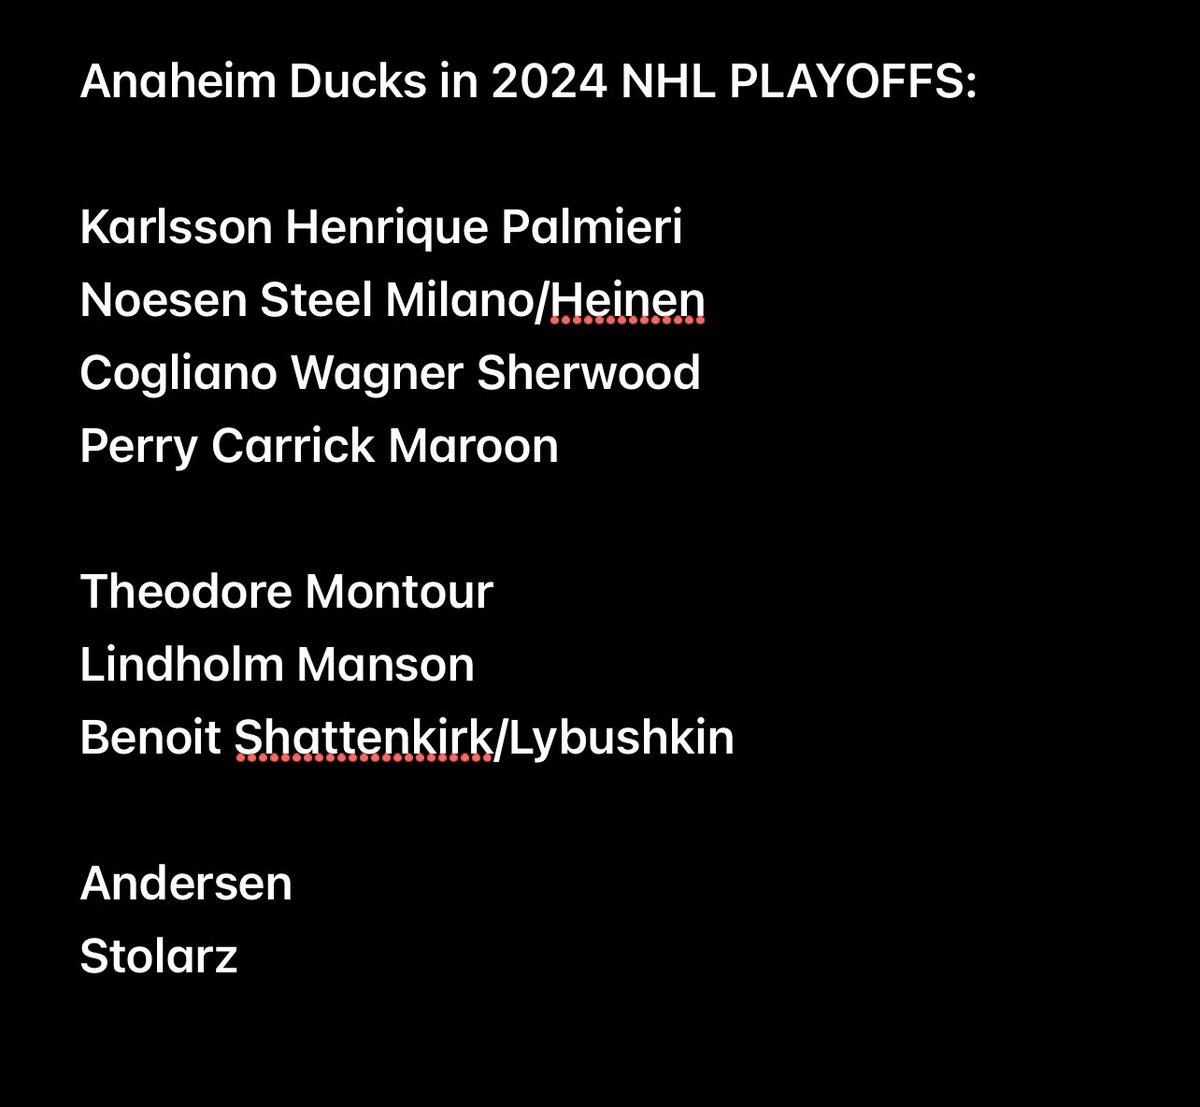 Watching the NHL playoffs got me thinking…@AnaheimDucks can form a squad with ex-players🦆👀